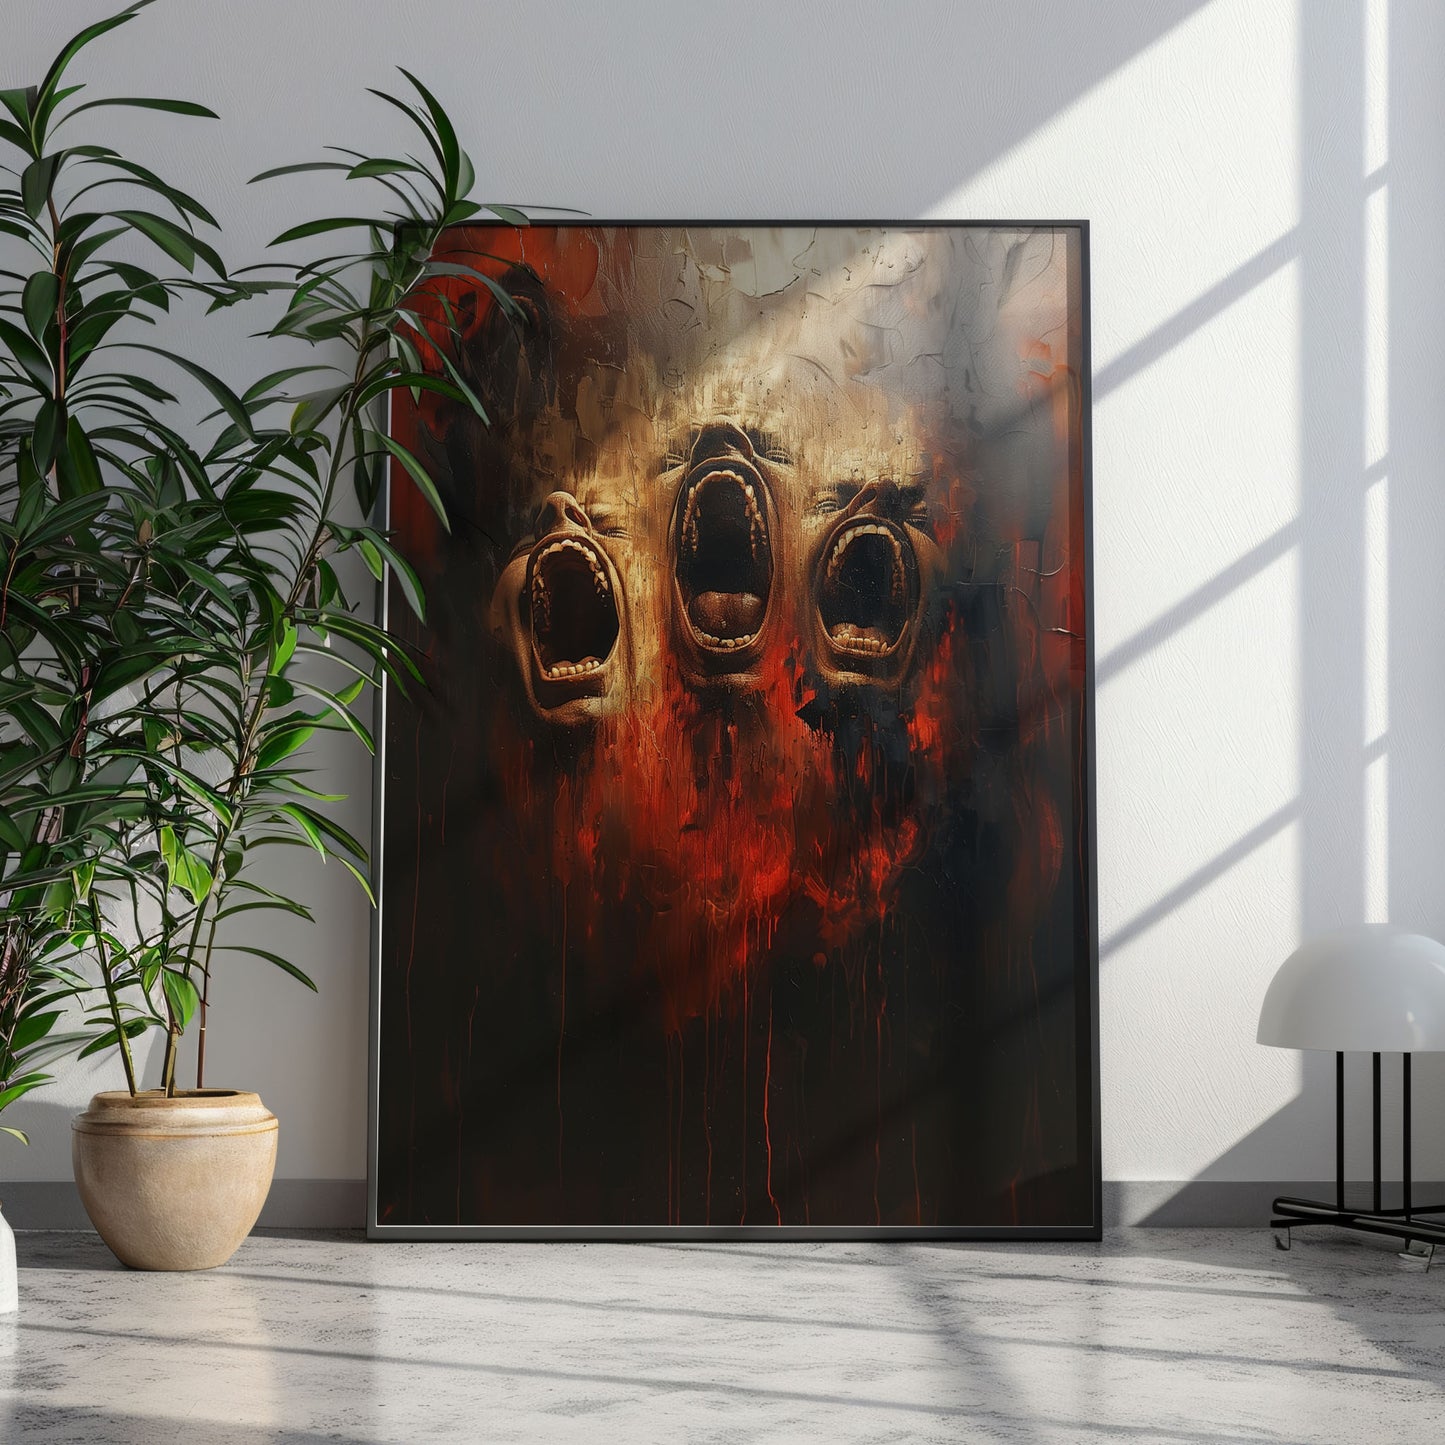 Screams from Hell Poster - Dark Gothic Oil Painting - Horror Art Print